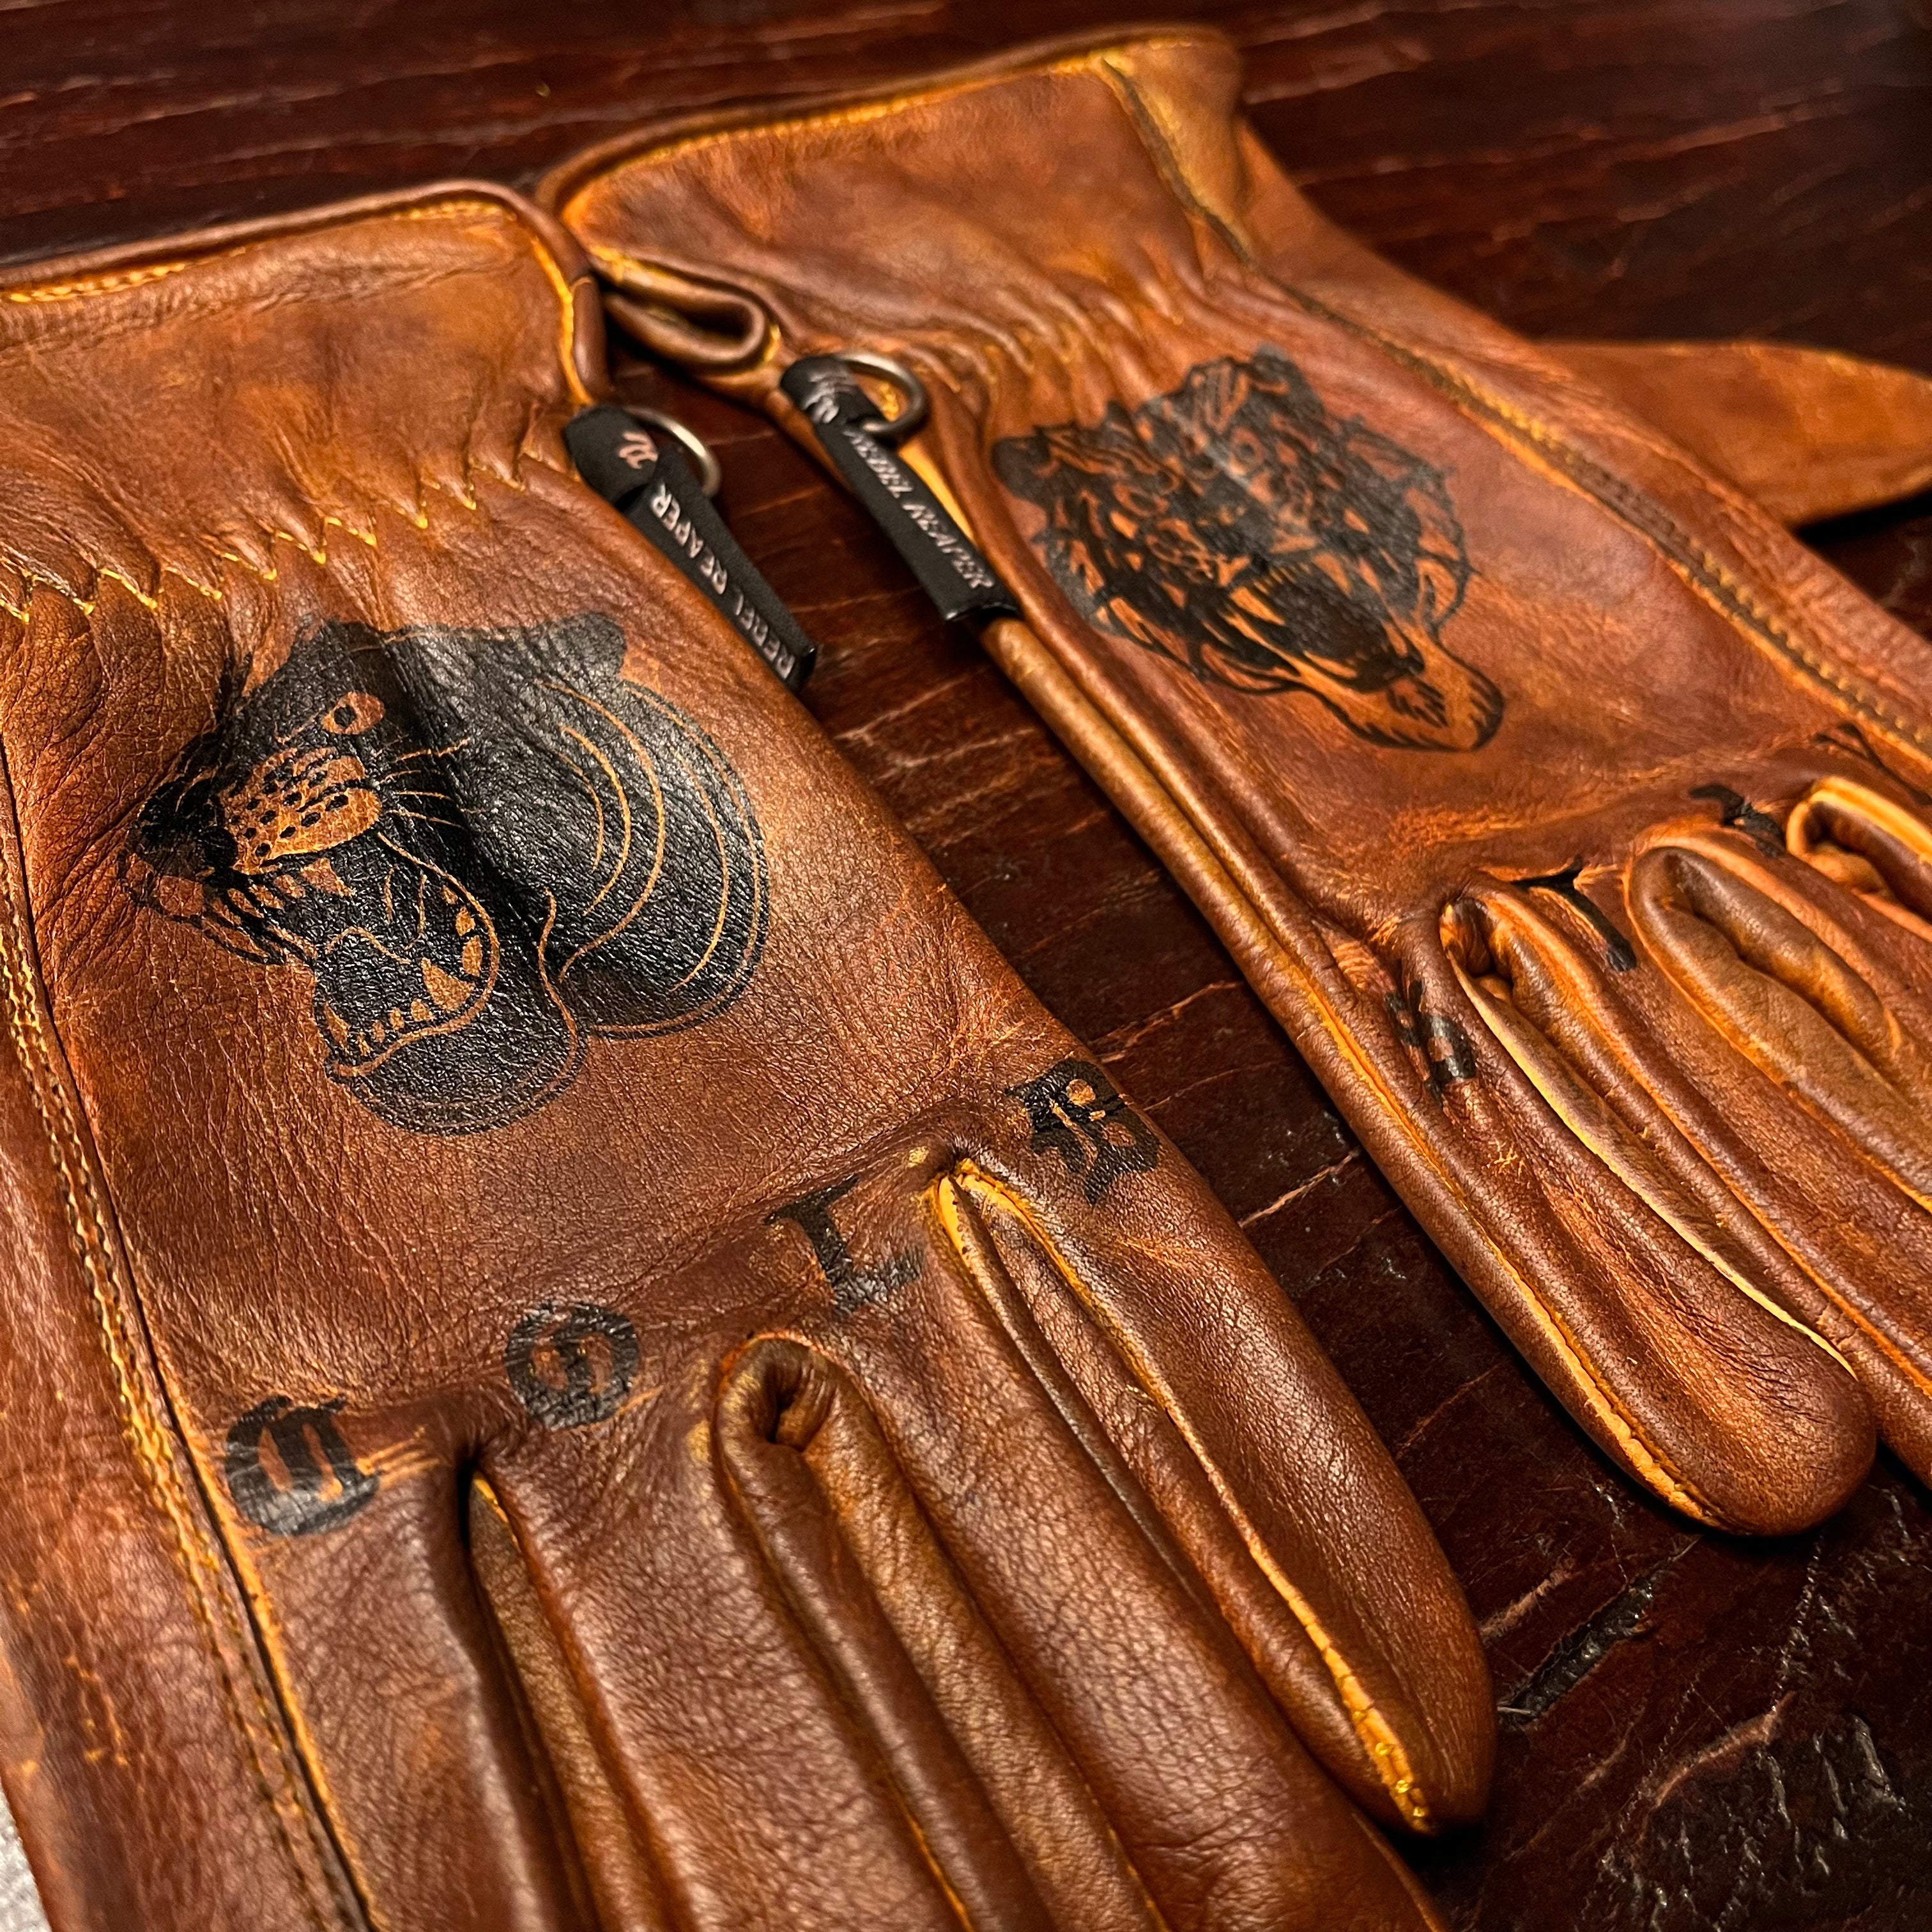 Roper "Stay Cold" - Slip Wrist - Distressed Brown Leather Gloves - Rebel Reaper Clothing CompanyLeather Gloves